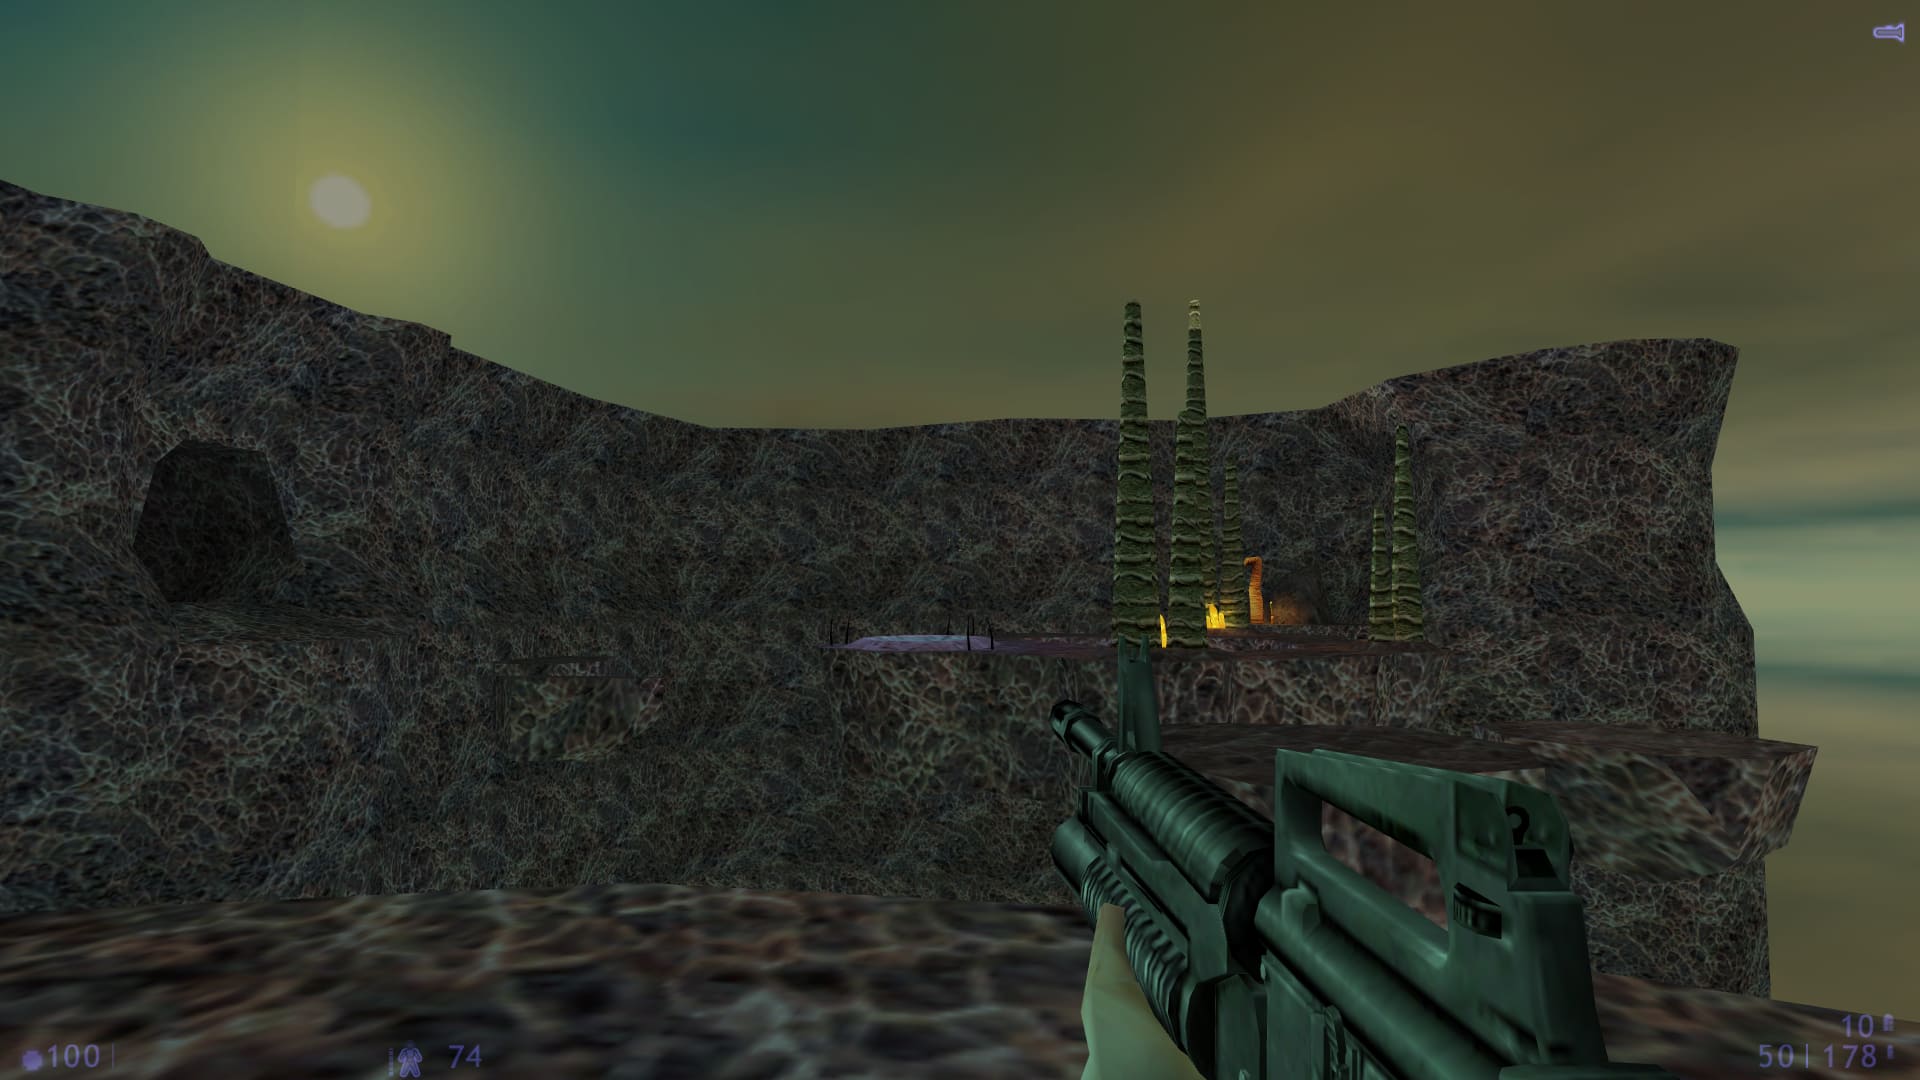 A screenshot from Half-Life: Blue Shift. A vista of Xen with a Sun-like solar object illuminating the floating rock formations.